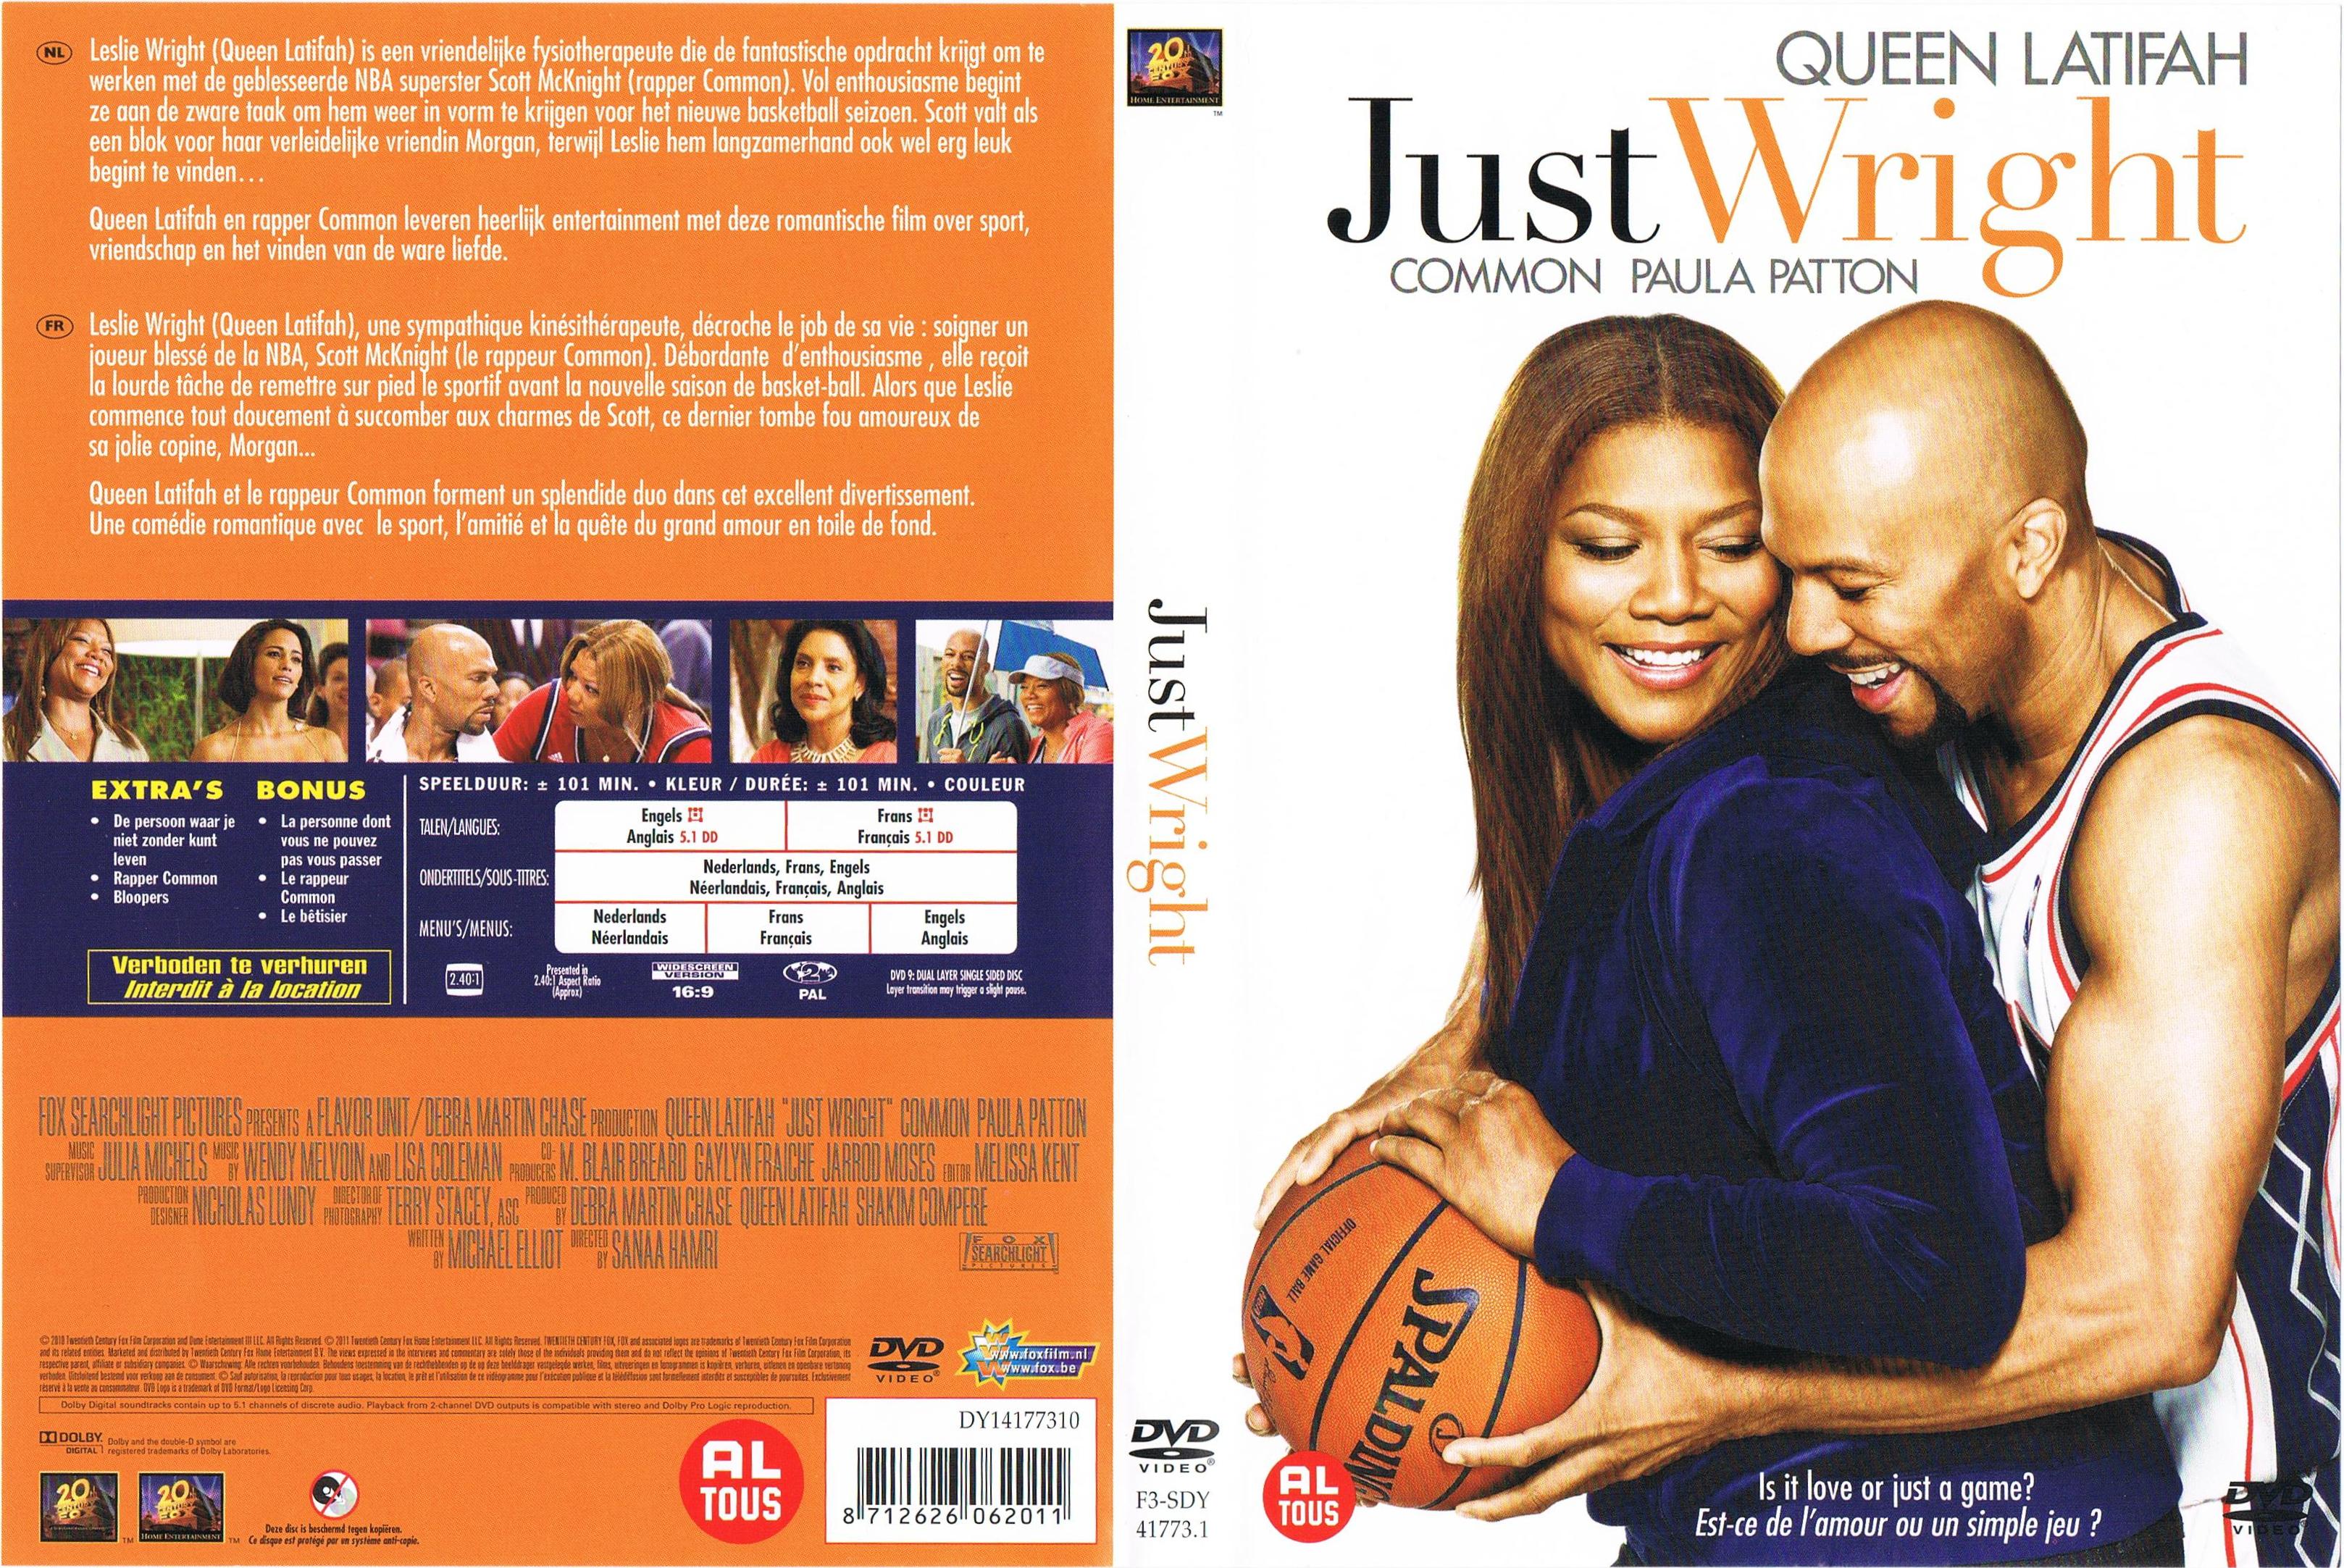 Jaquette DVD Just wright